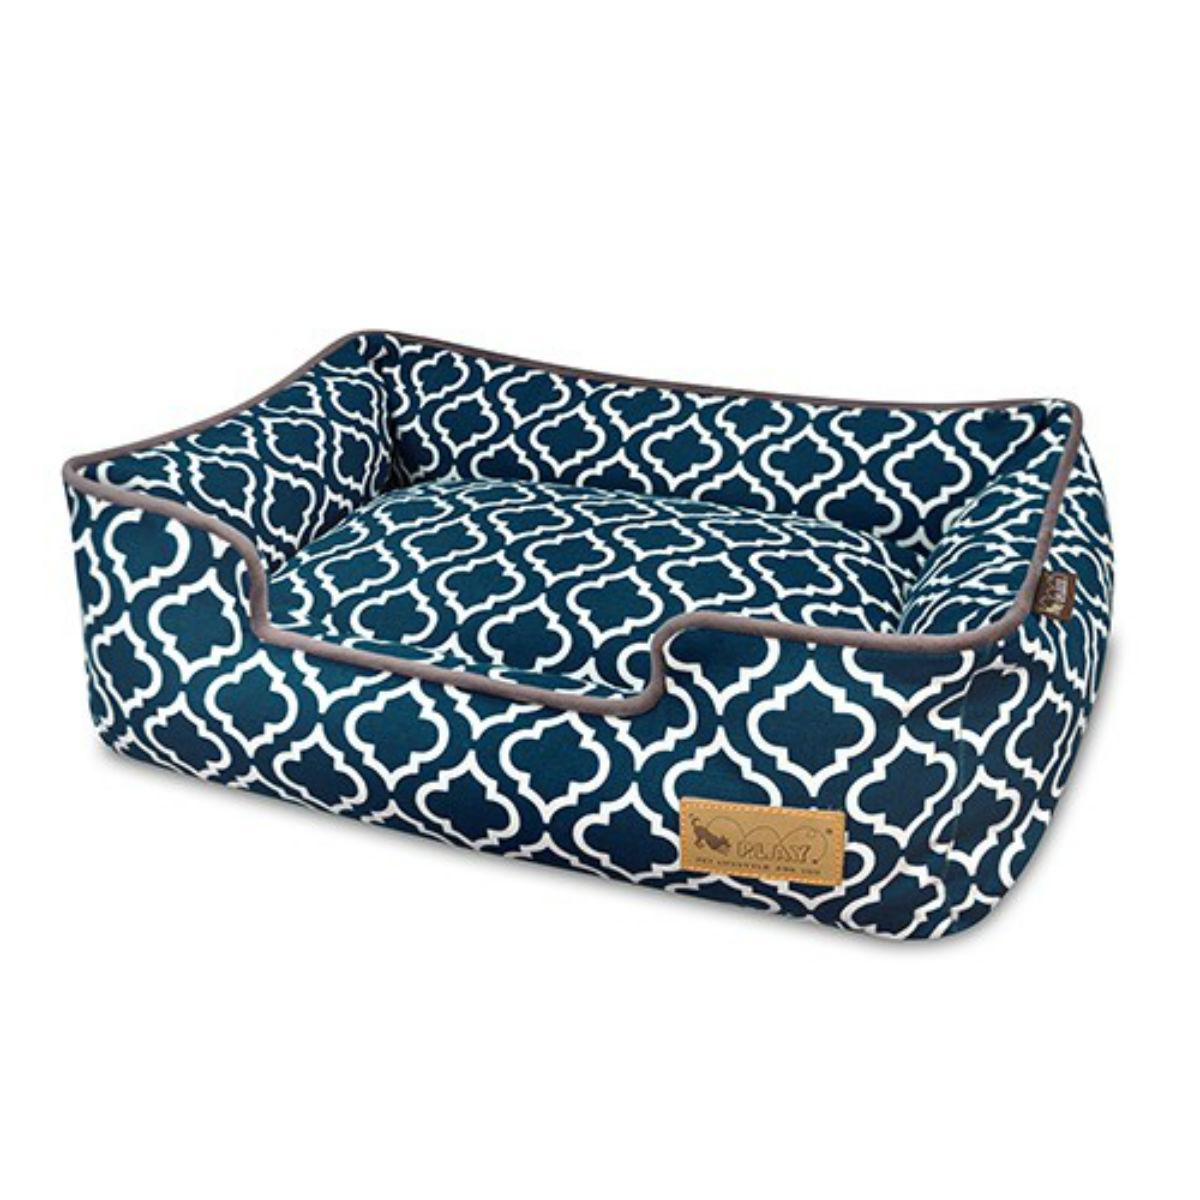 P.L.A.Y. Moroccan Lounge Dog Bed - Navy Blue